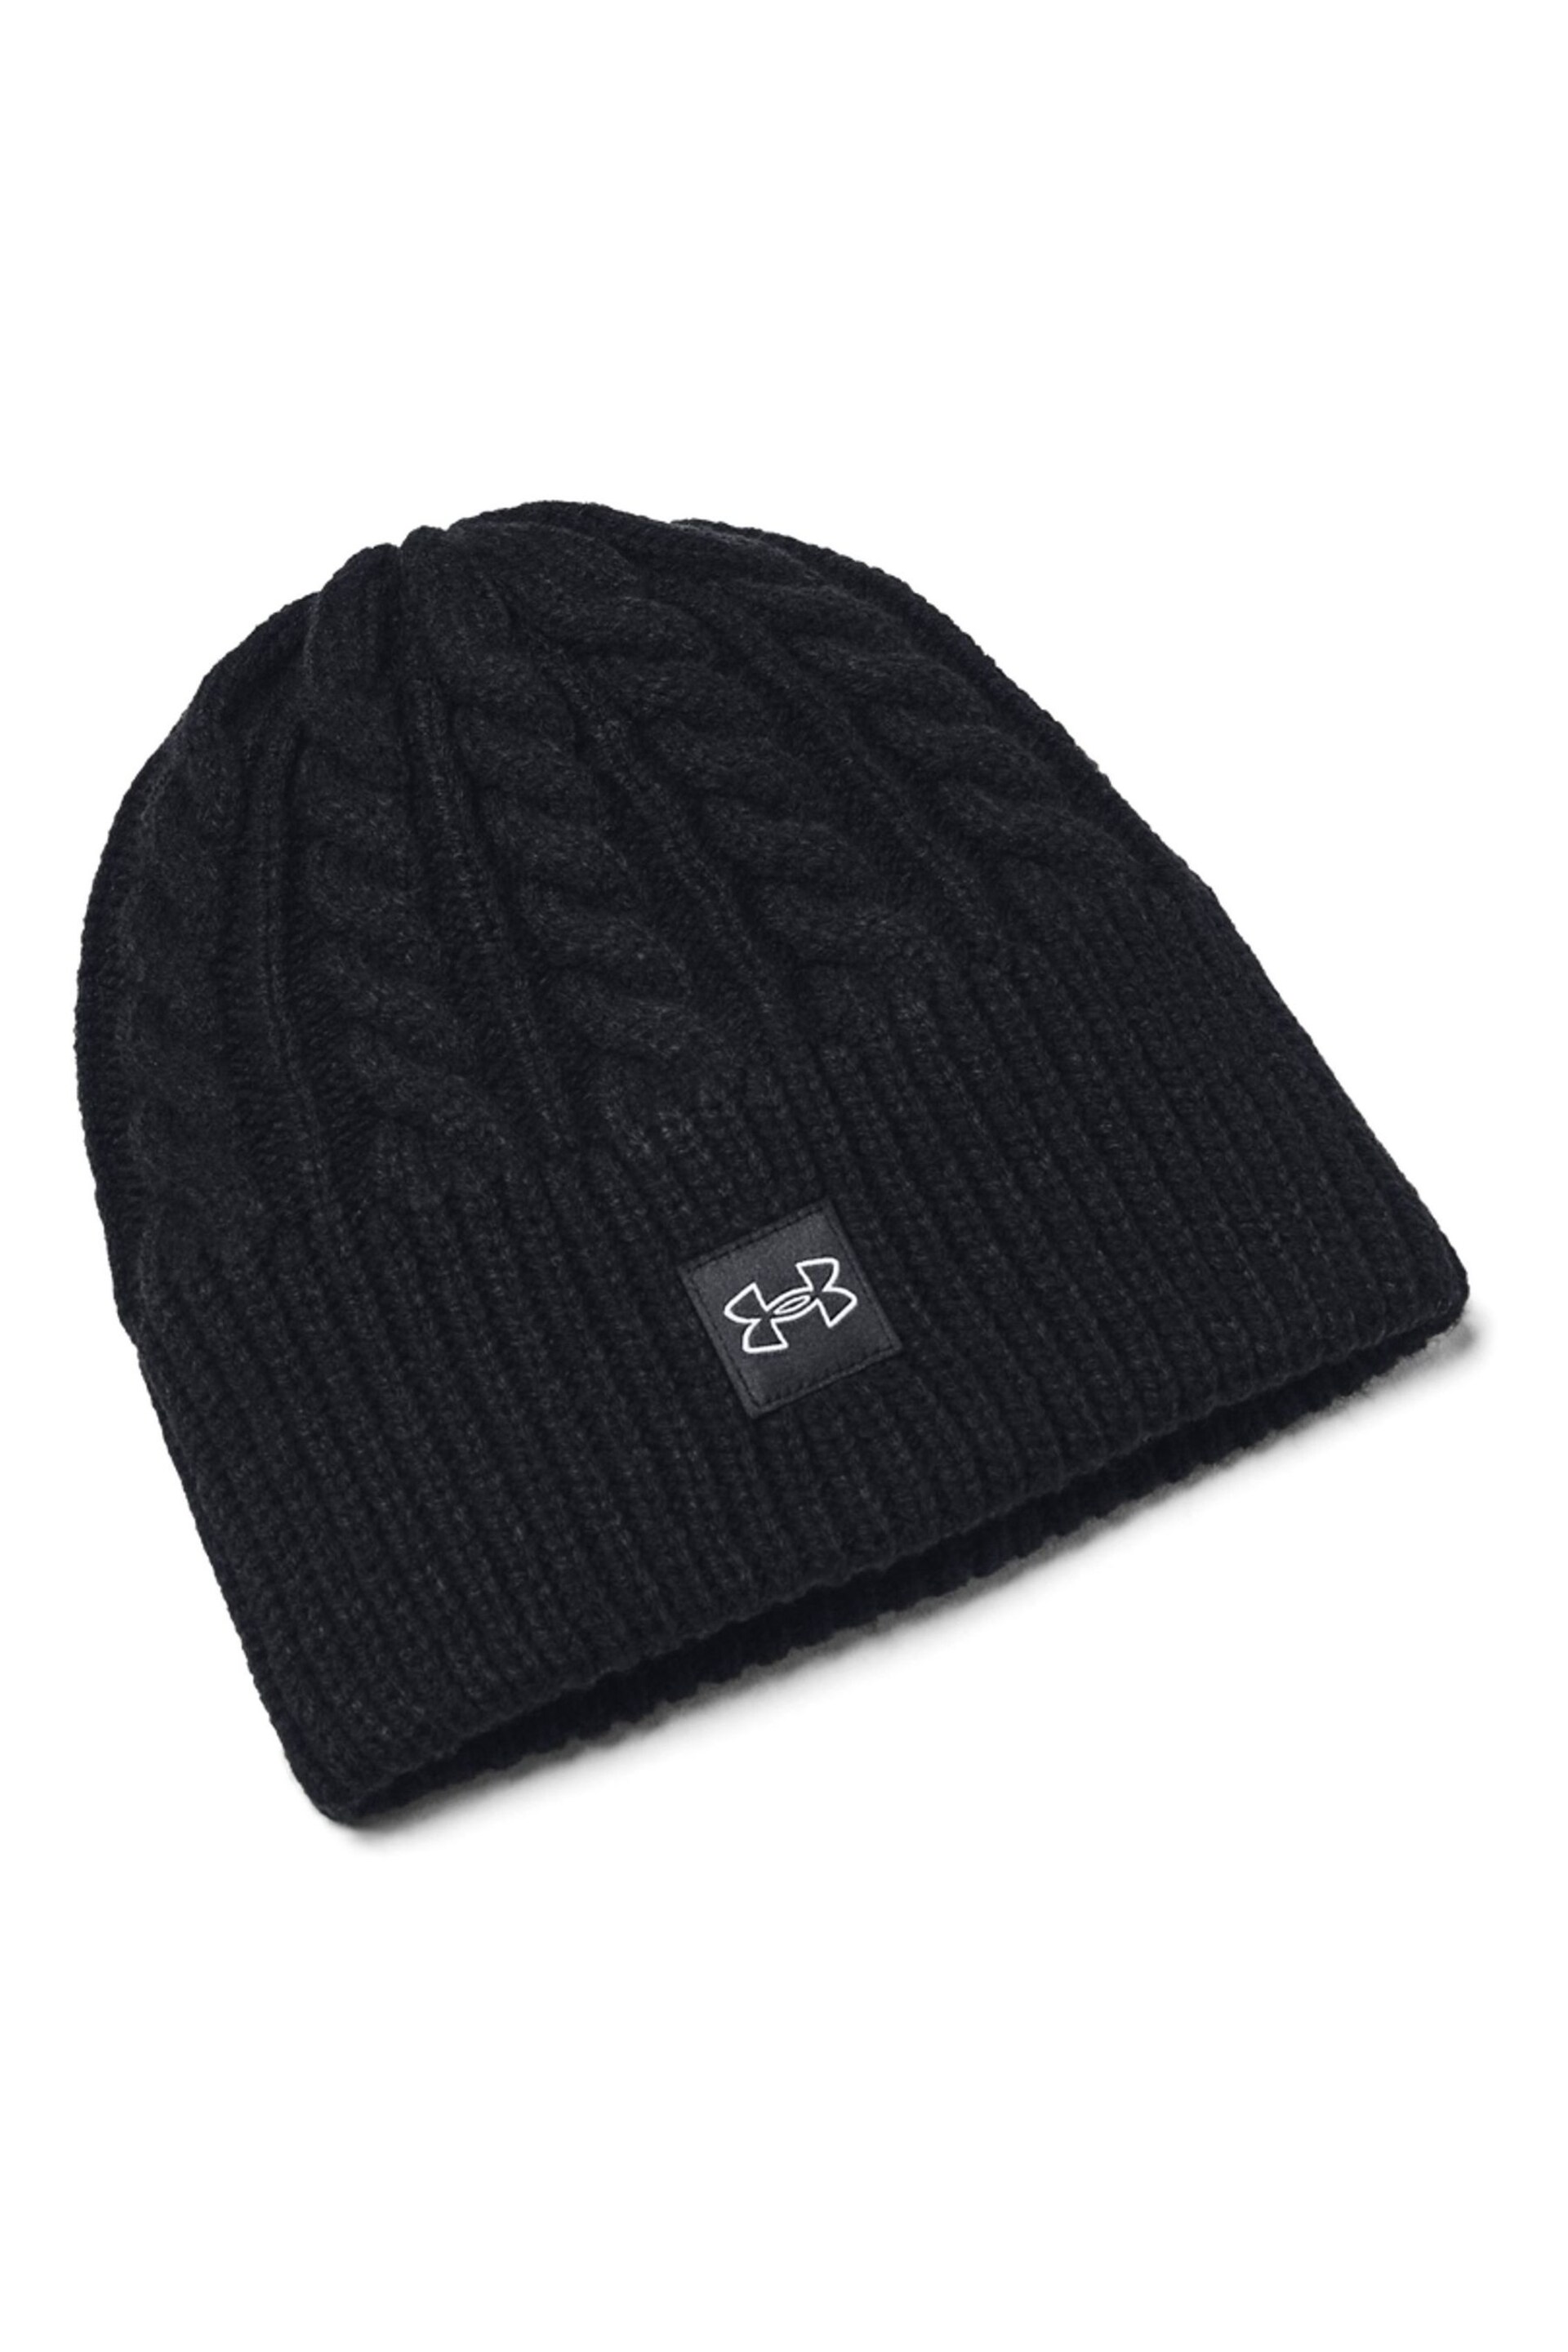 Under Armour Halftime Cable Knit Beanie - Image 4 of 5